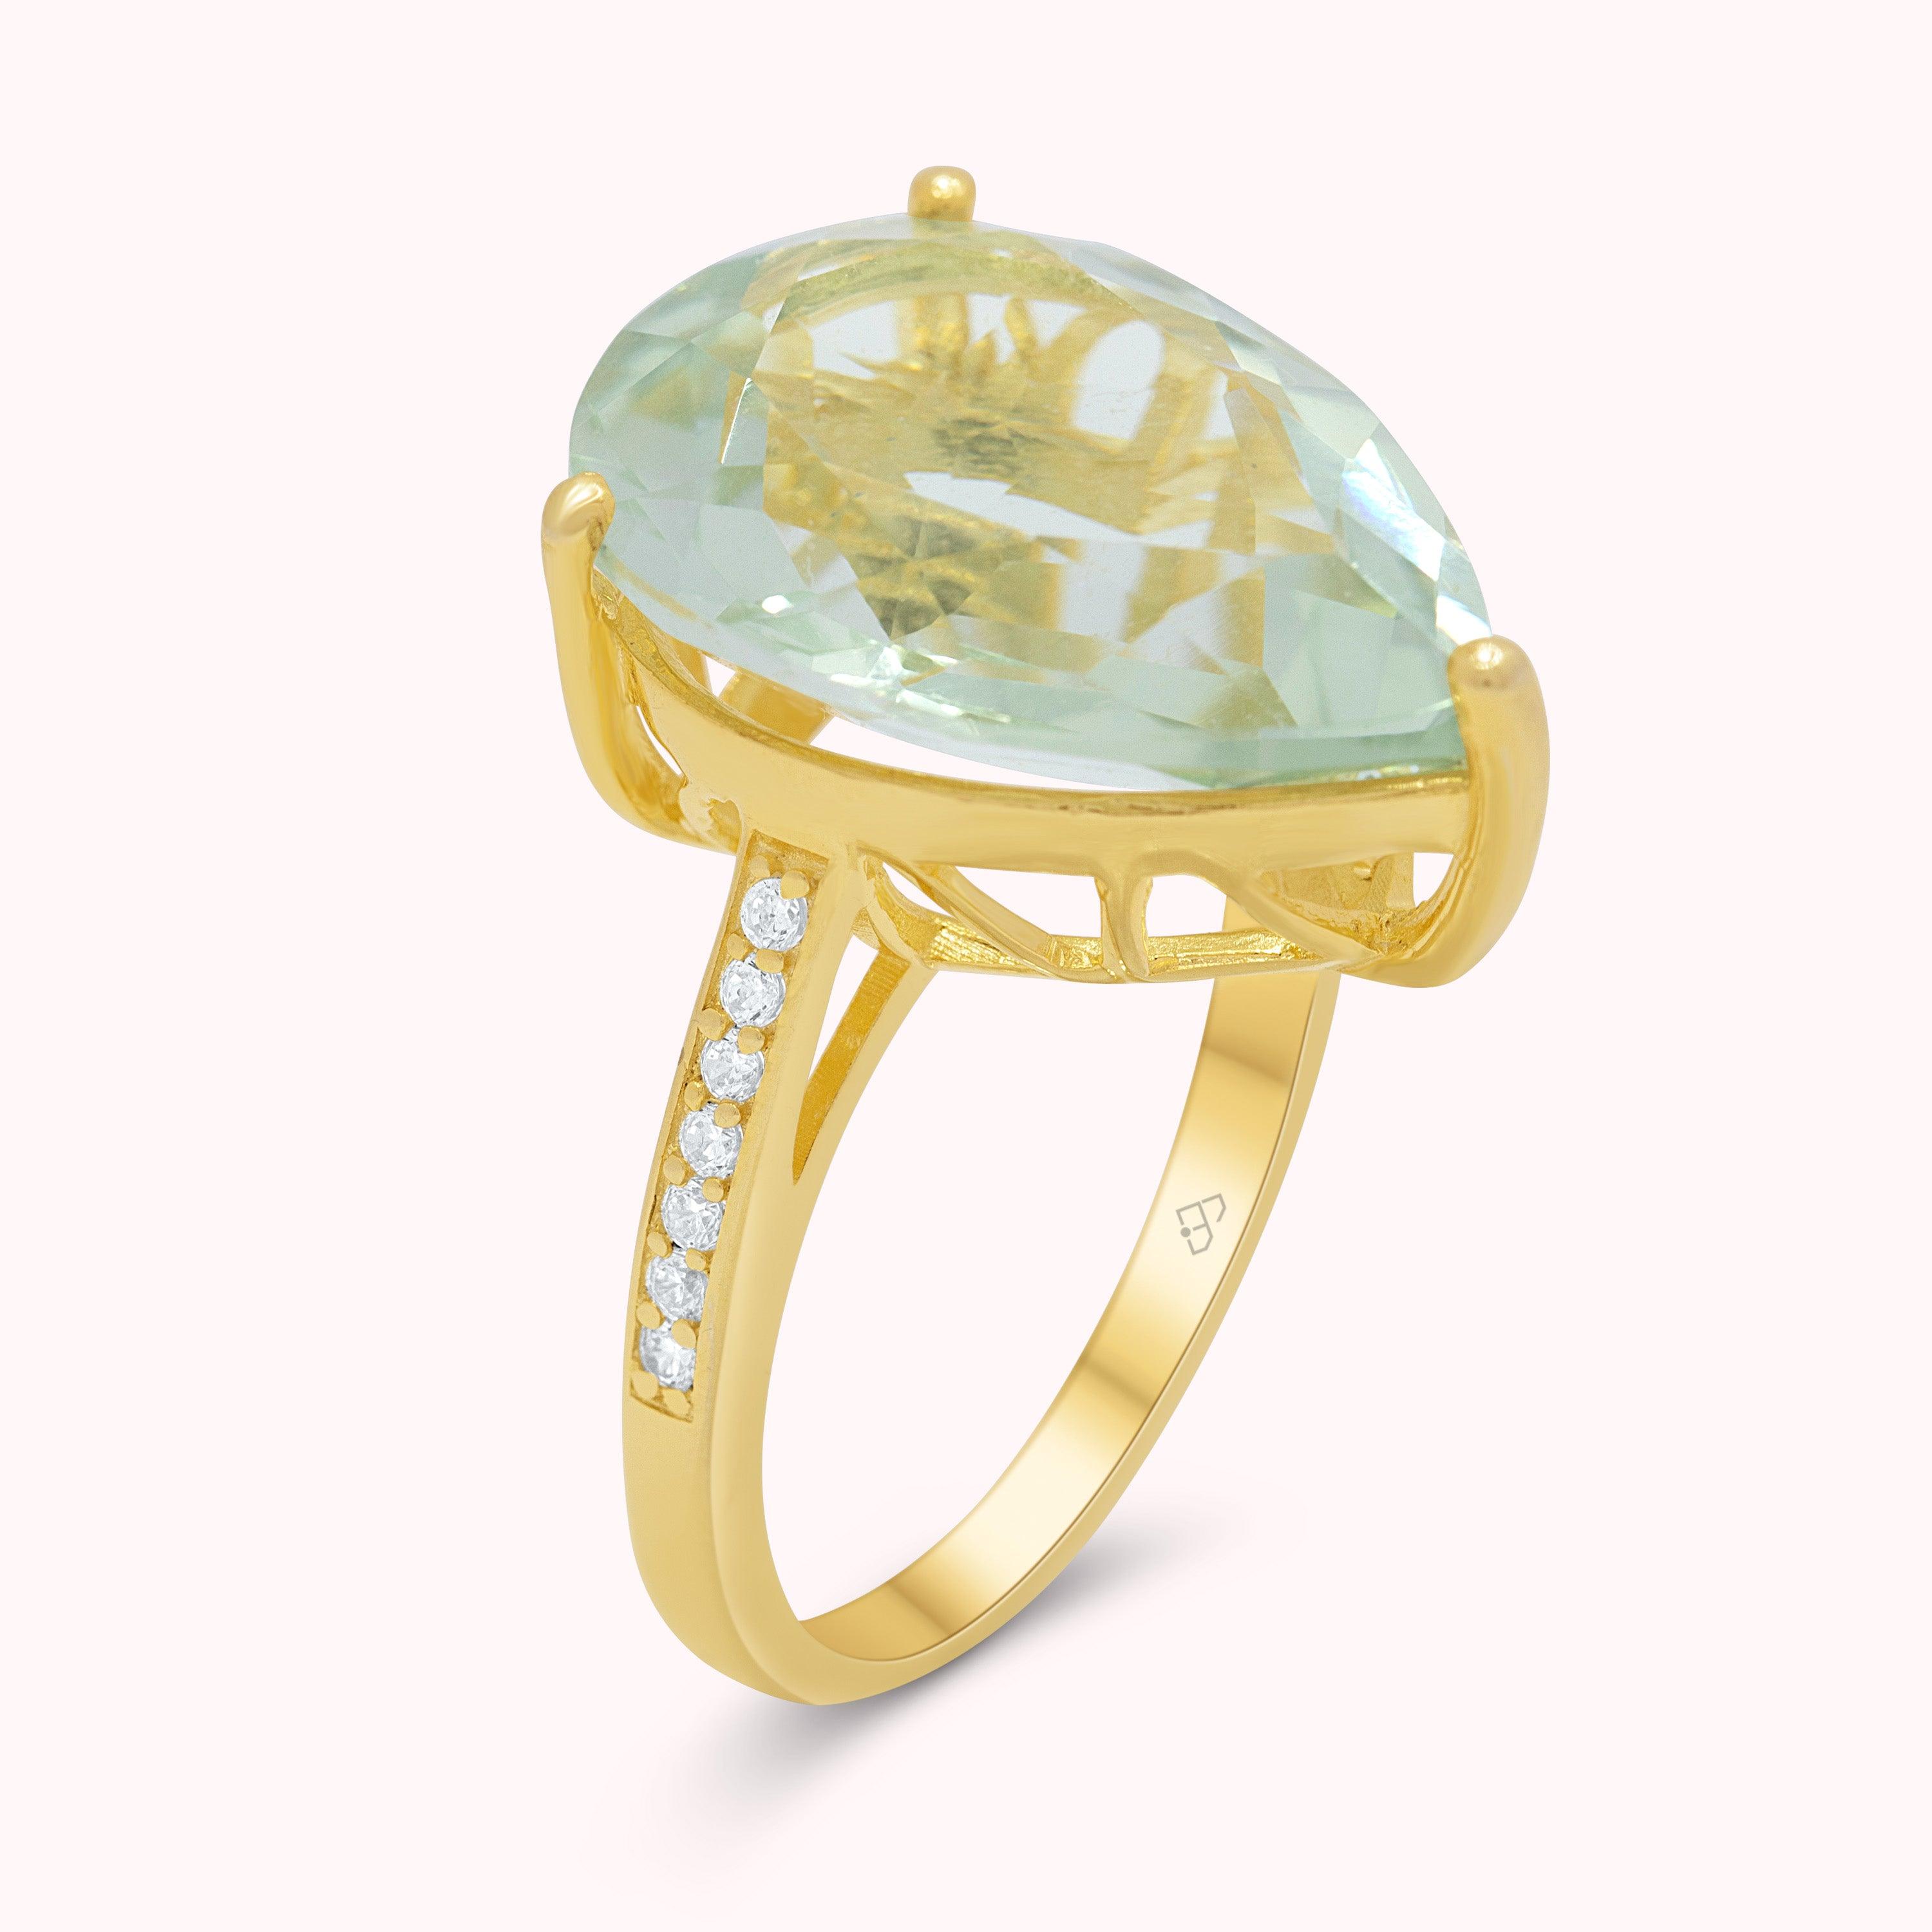 Impressive Natural 11ct Green Amethyst Ring, Birthstone Jewelry in Sterling Silver & 14K Gold VERMEIL,